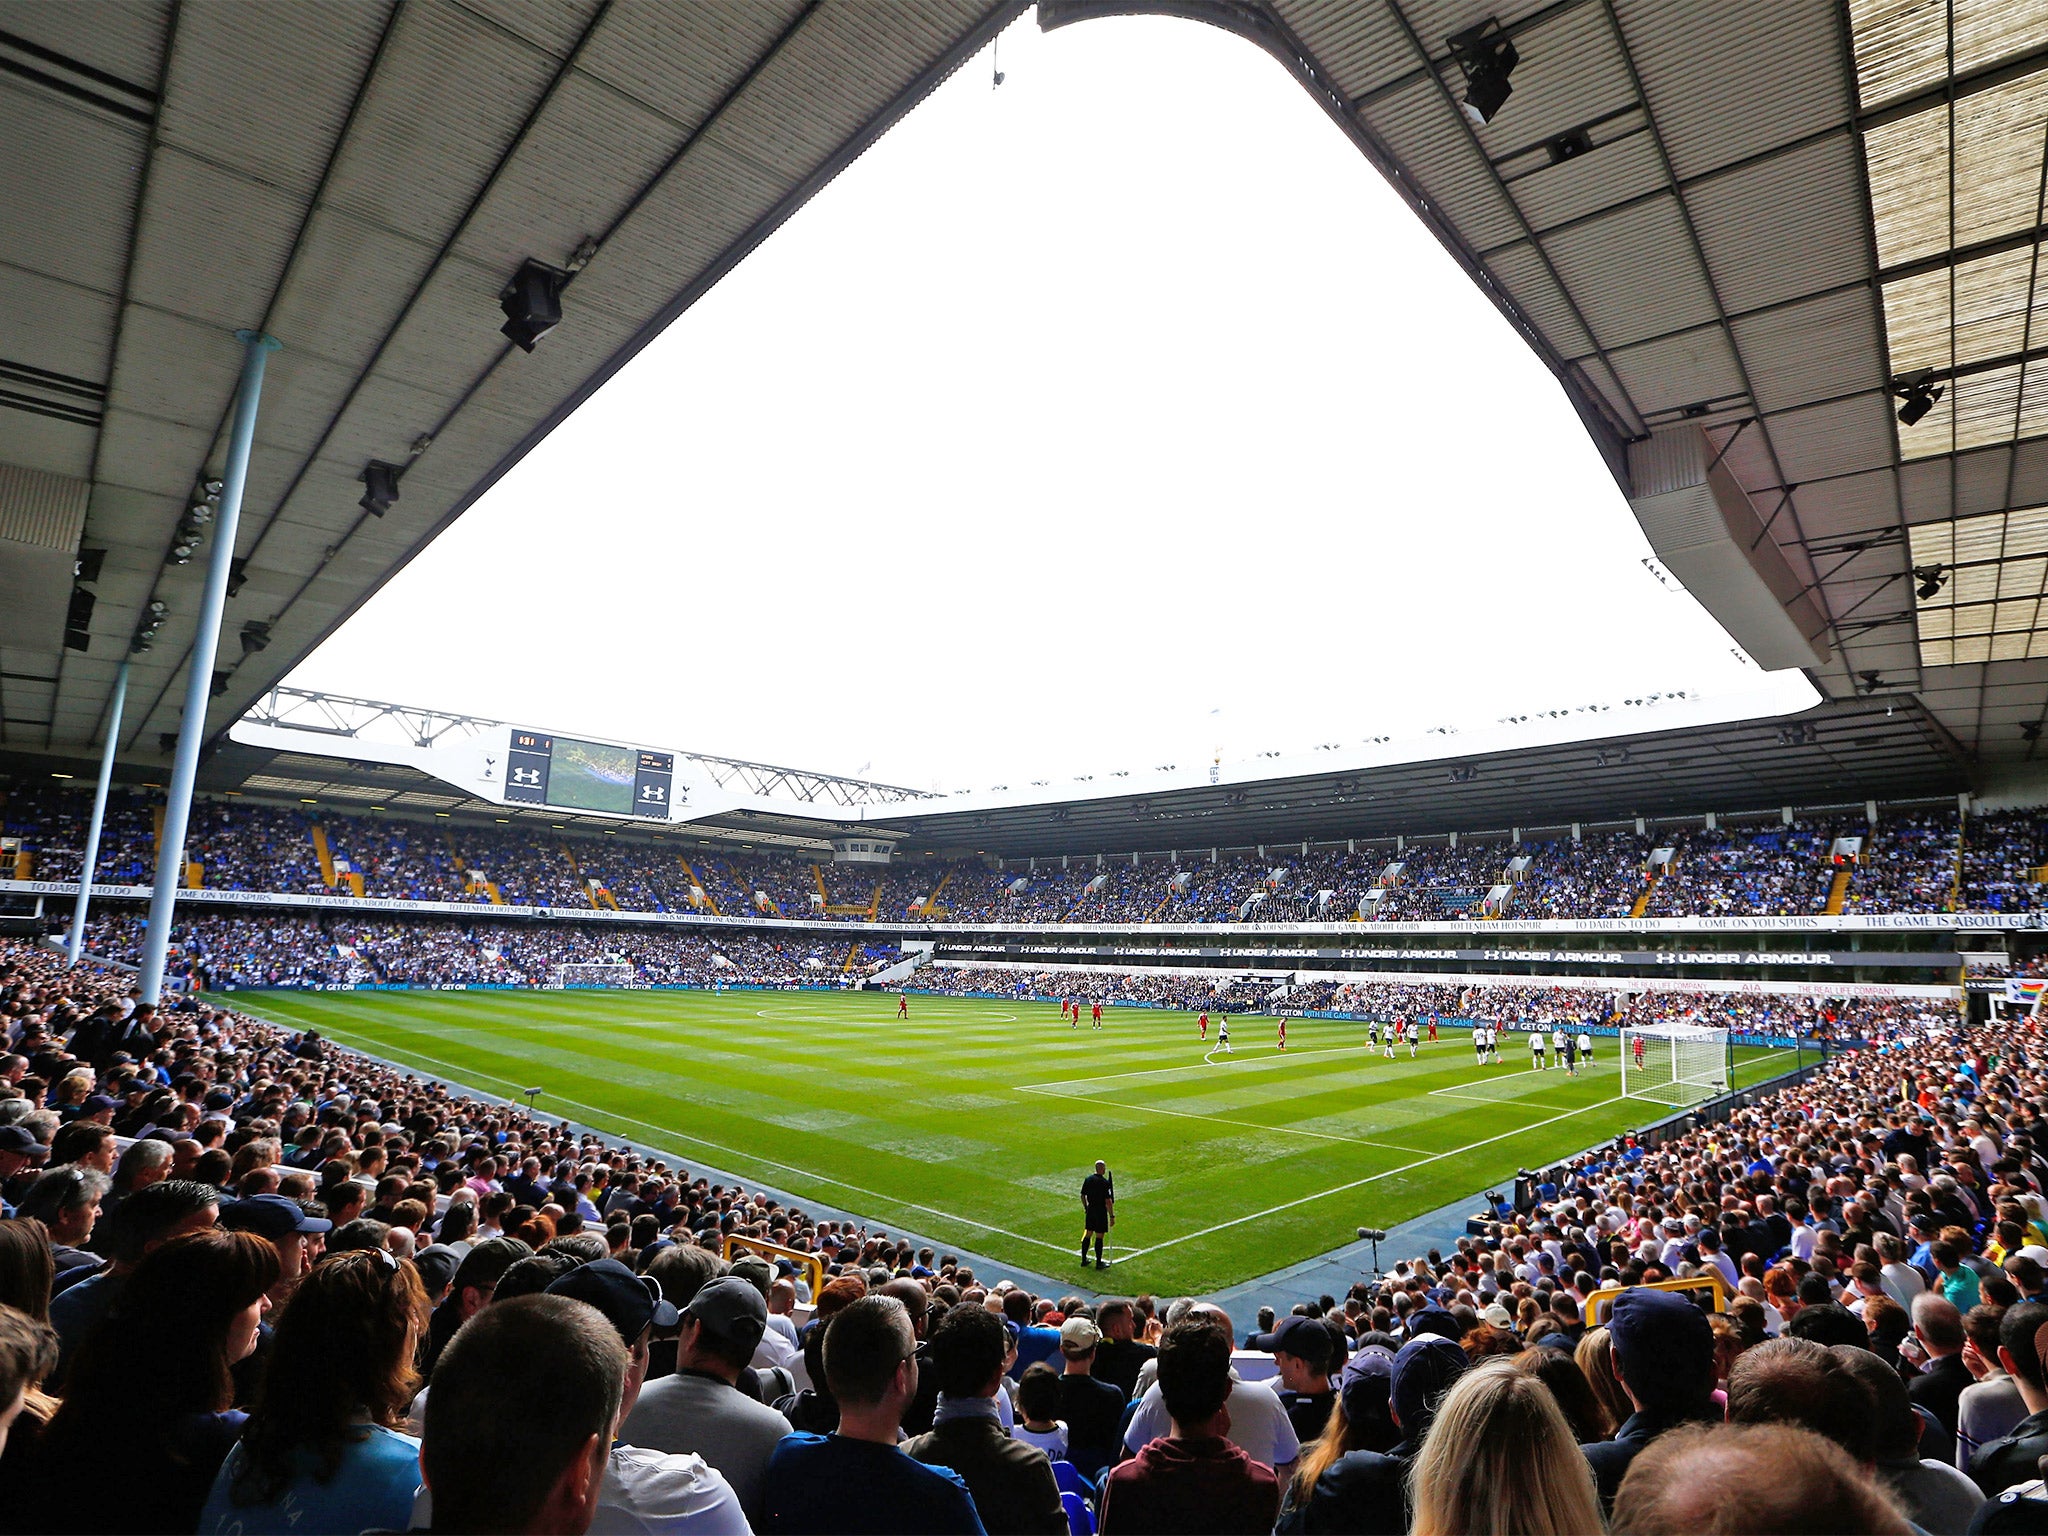 The White Hart Lane pitch is not Spurs manager Mauricio Pochettino’s idea of a field of dreams